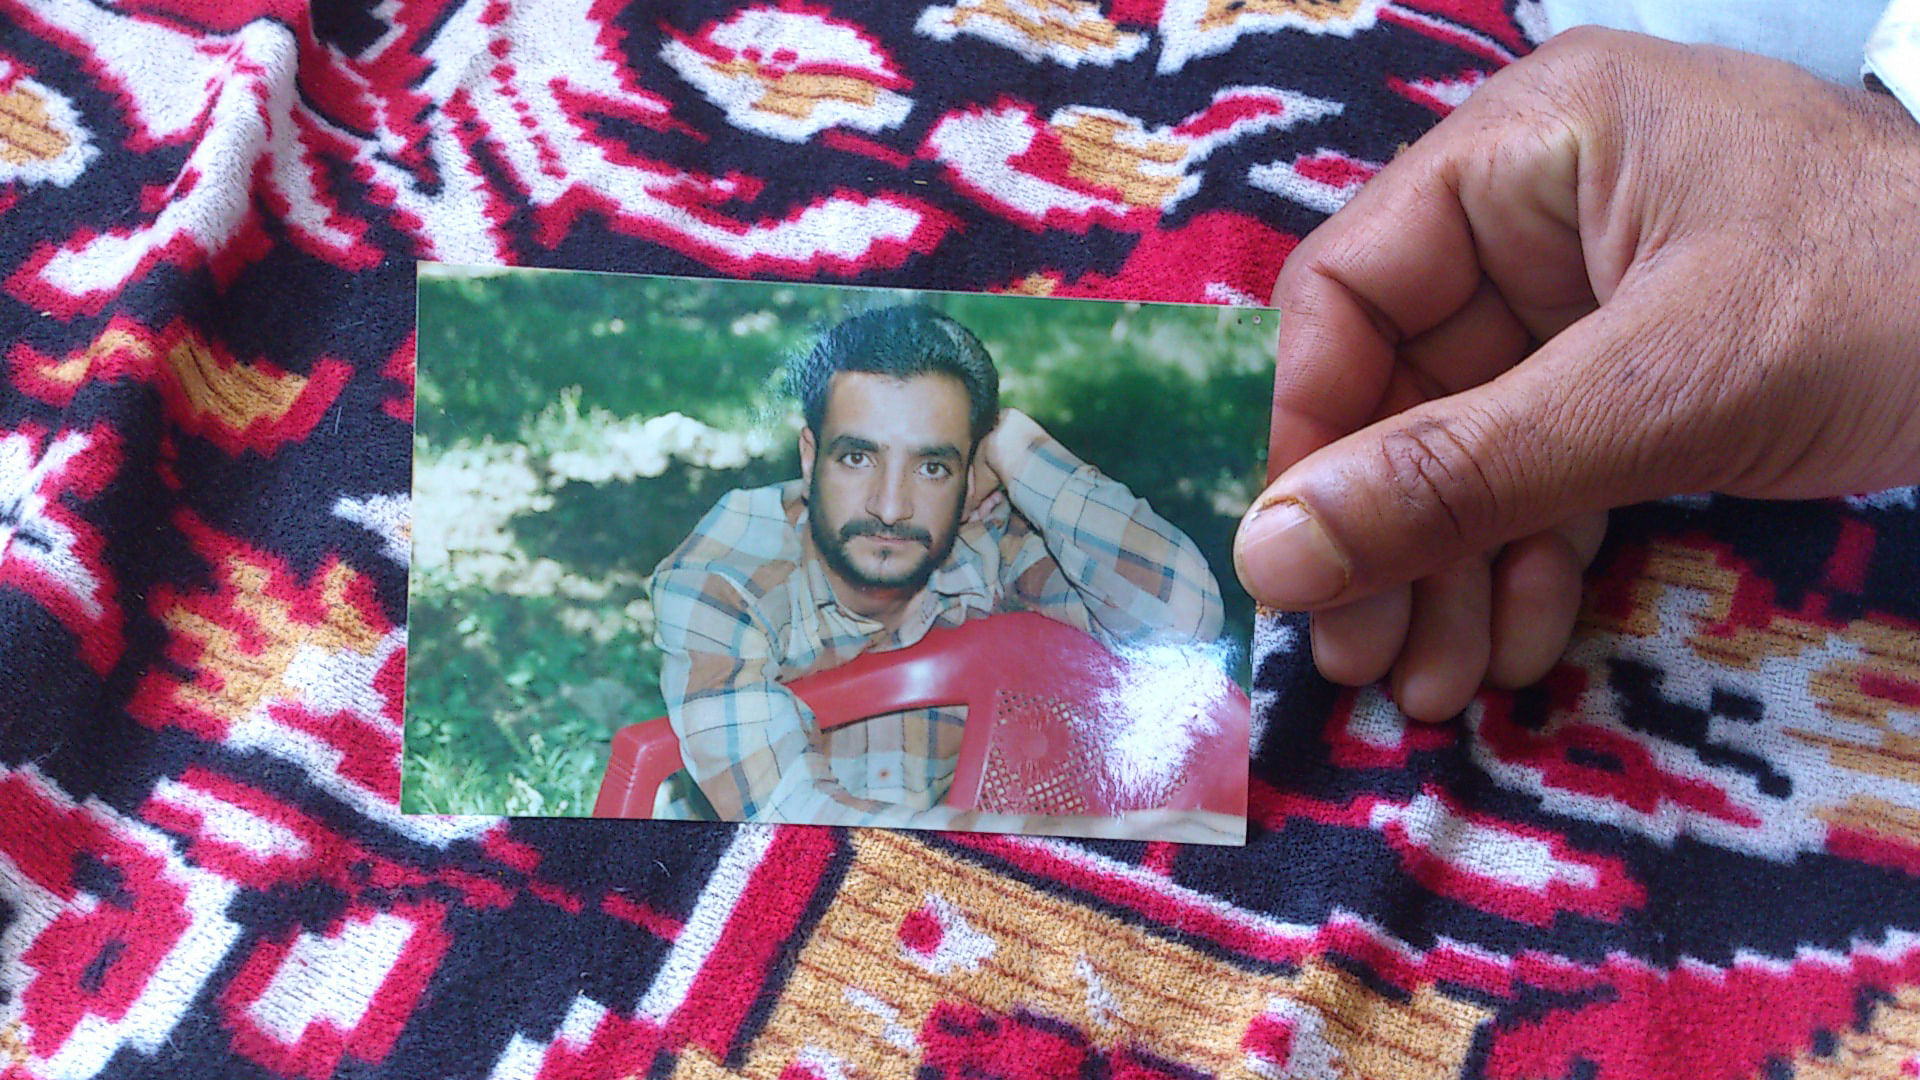 Khursheed Ahmad Bhat was shot dead near his shop in the Bomai locality of Sopore on June 12. (Photo: Jehangir Ali)